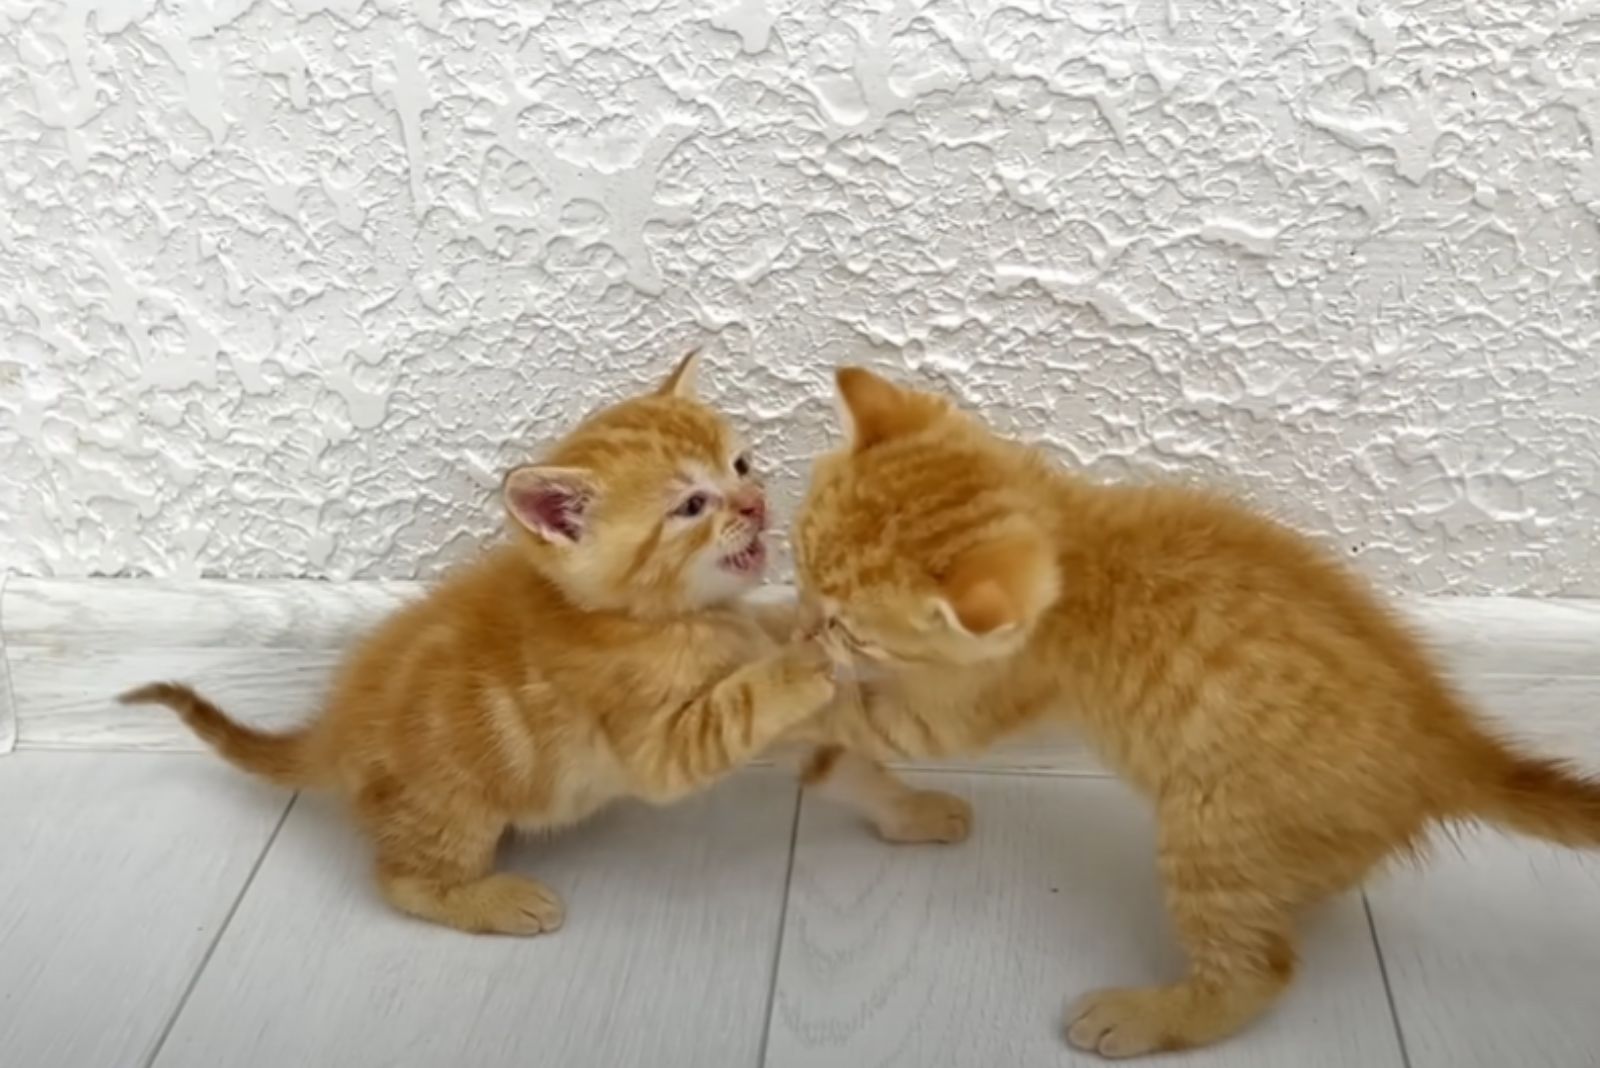 two kittens fighting